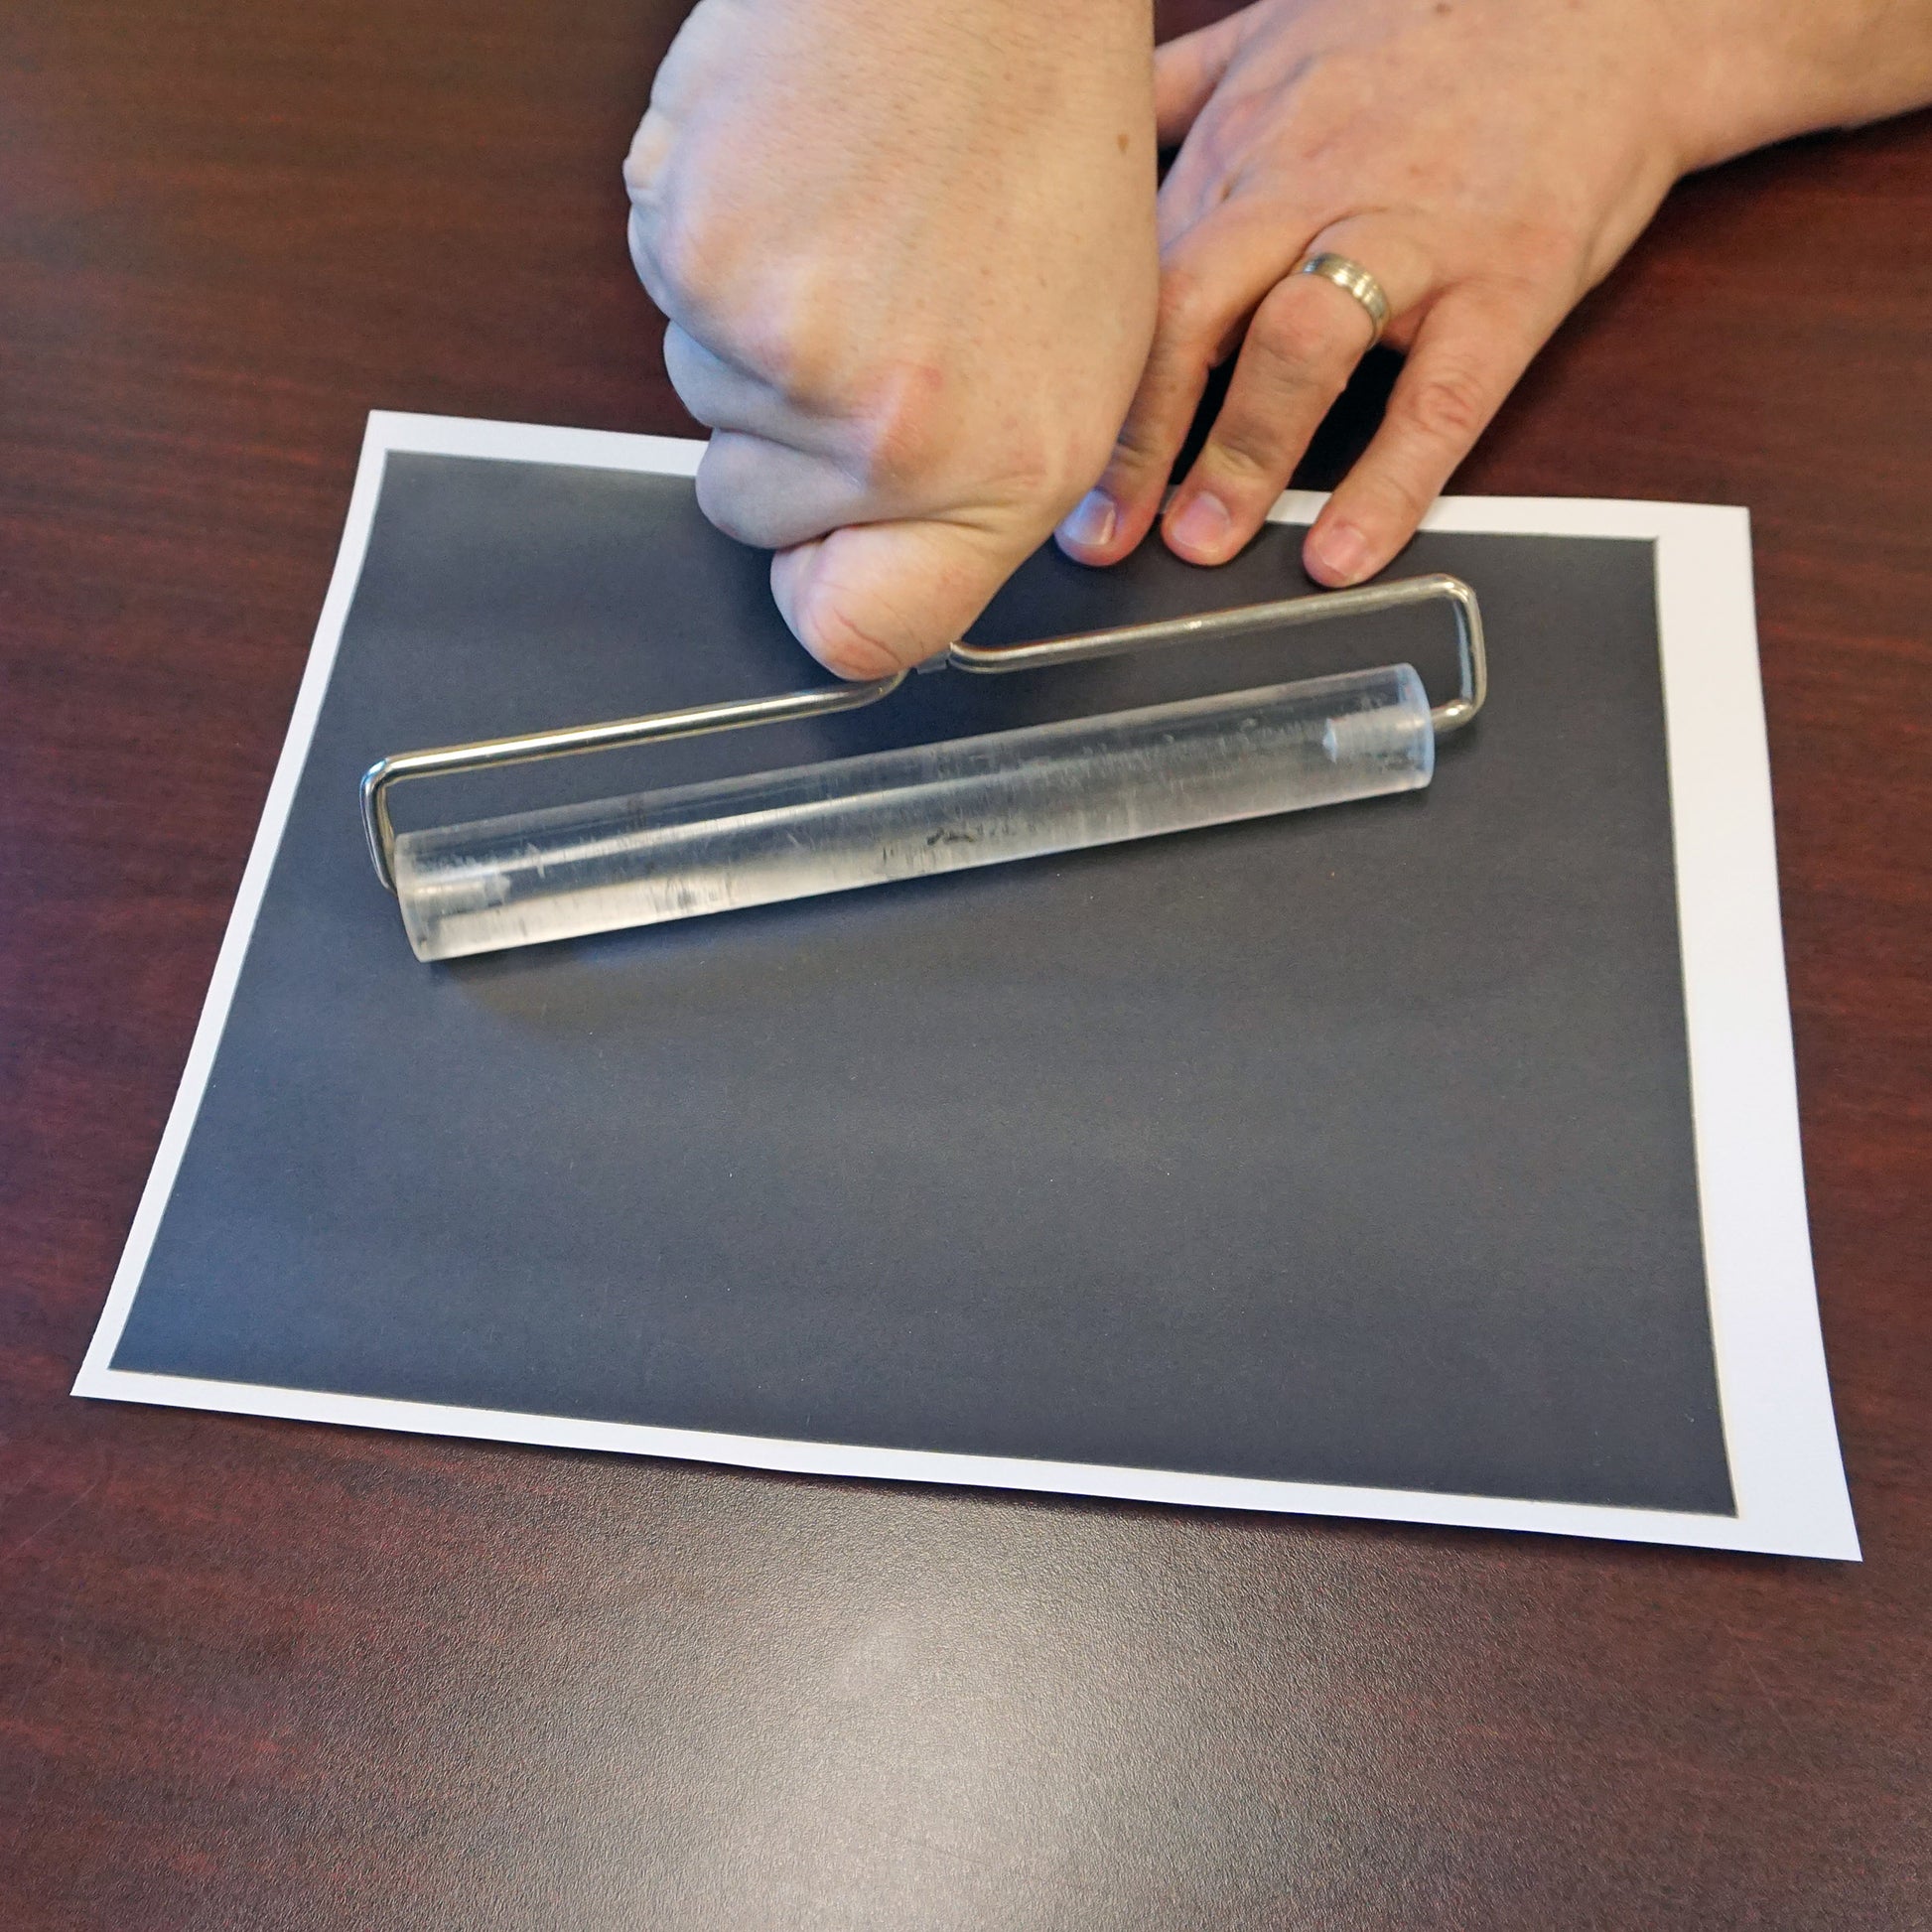 Load image into Gallery viewer, ZG20811A-F Flexible Magnetic Sheet with Adhesive - Hand Pressing Magnet onto Surface